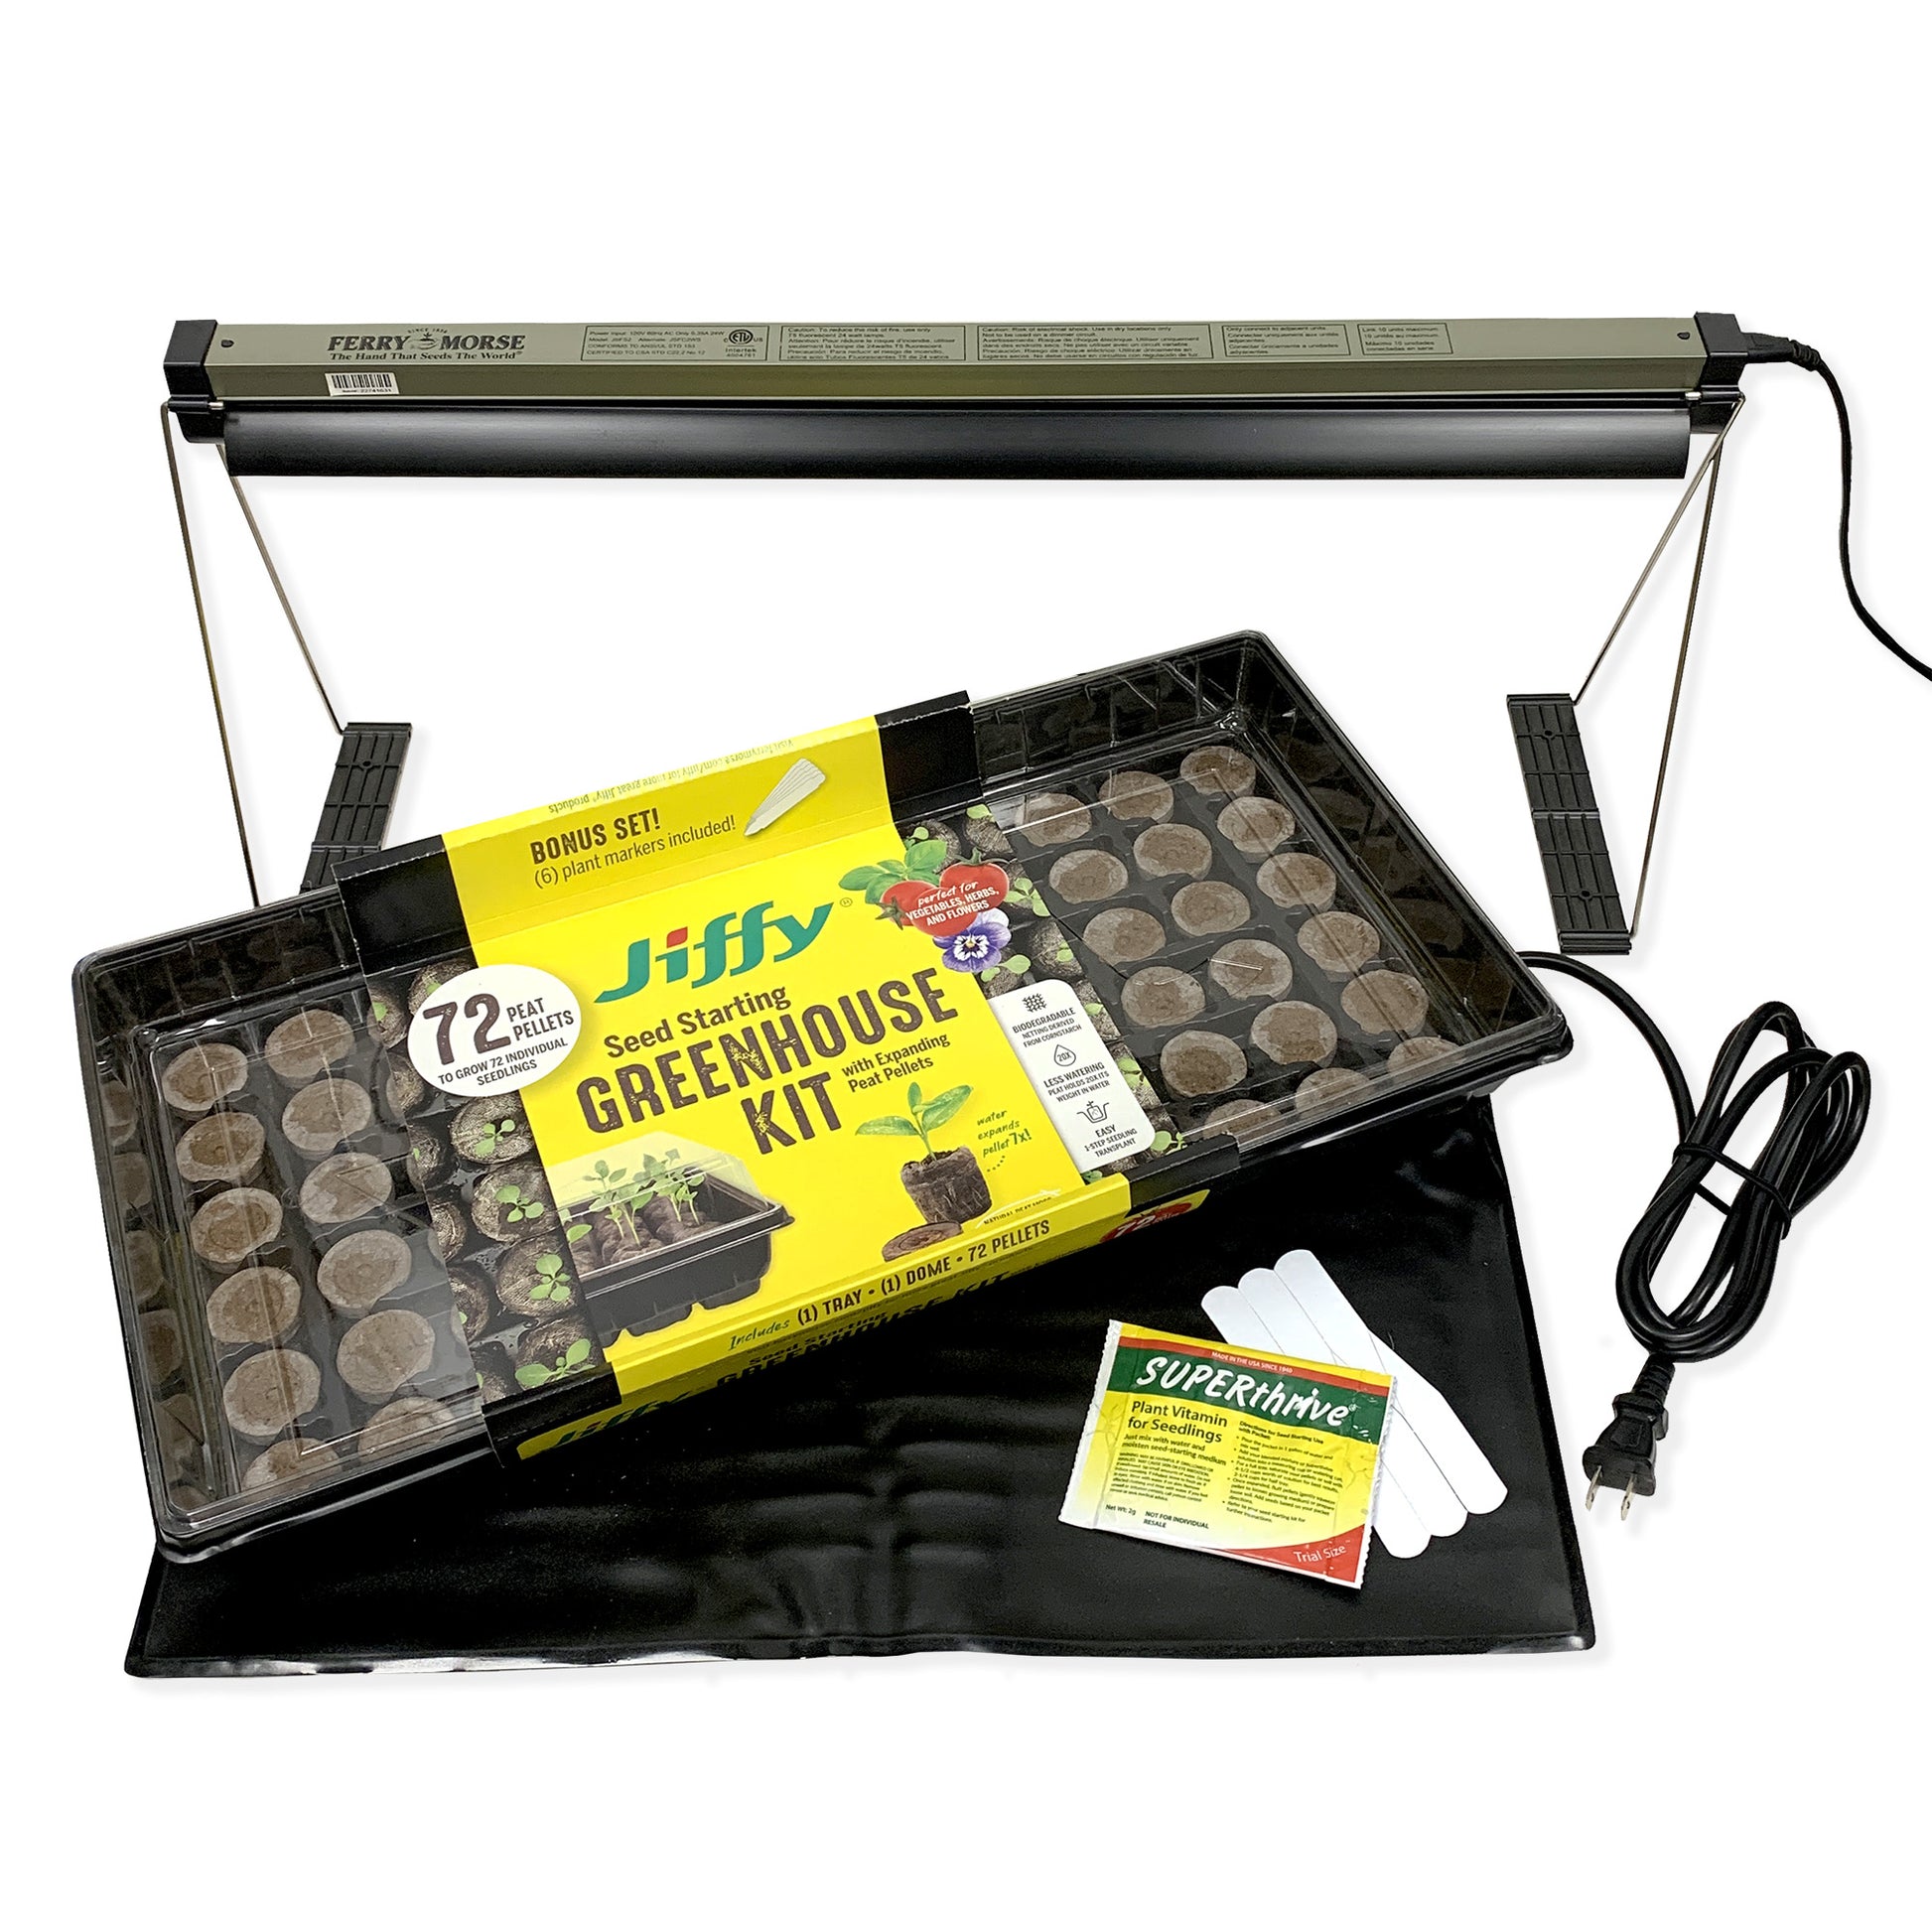 Your Complete Indoor Growing Seed Starting Kit with Garden Seeds from Ferry-Morse Seeds